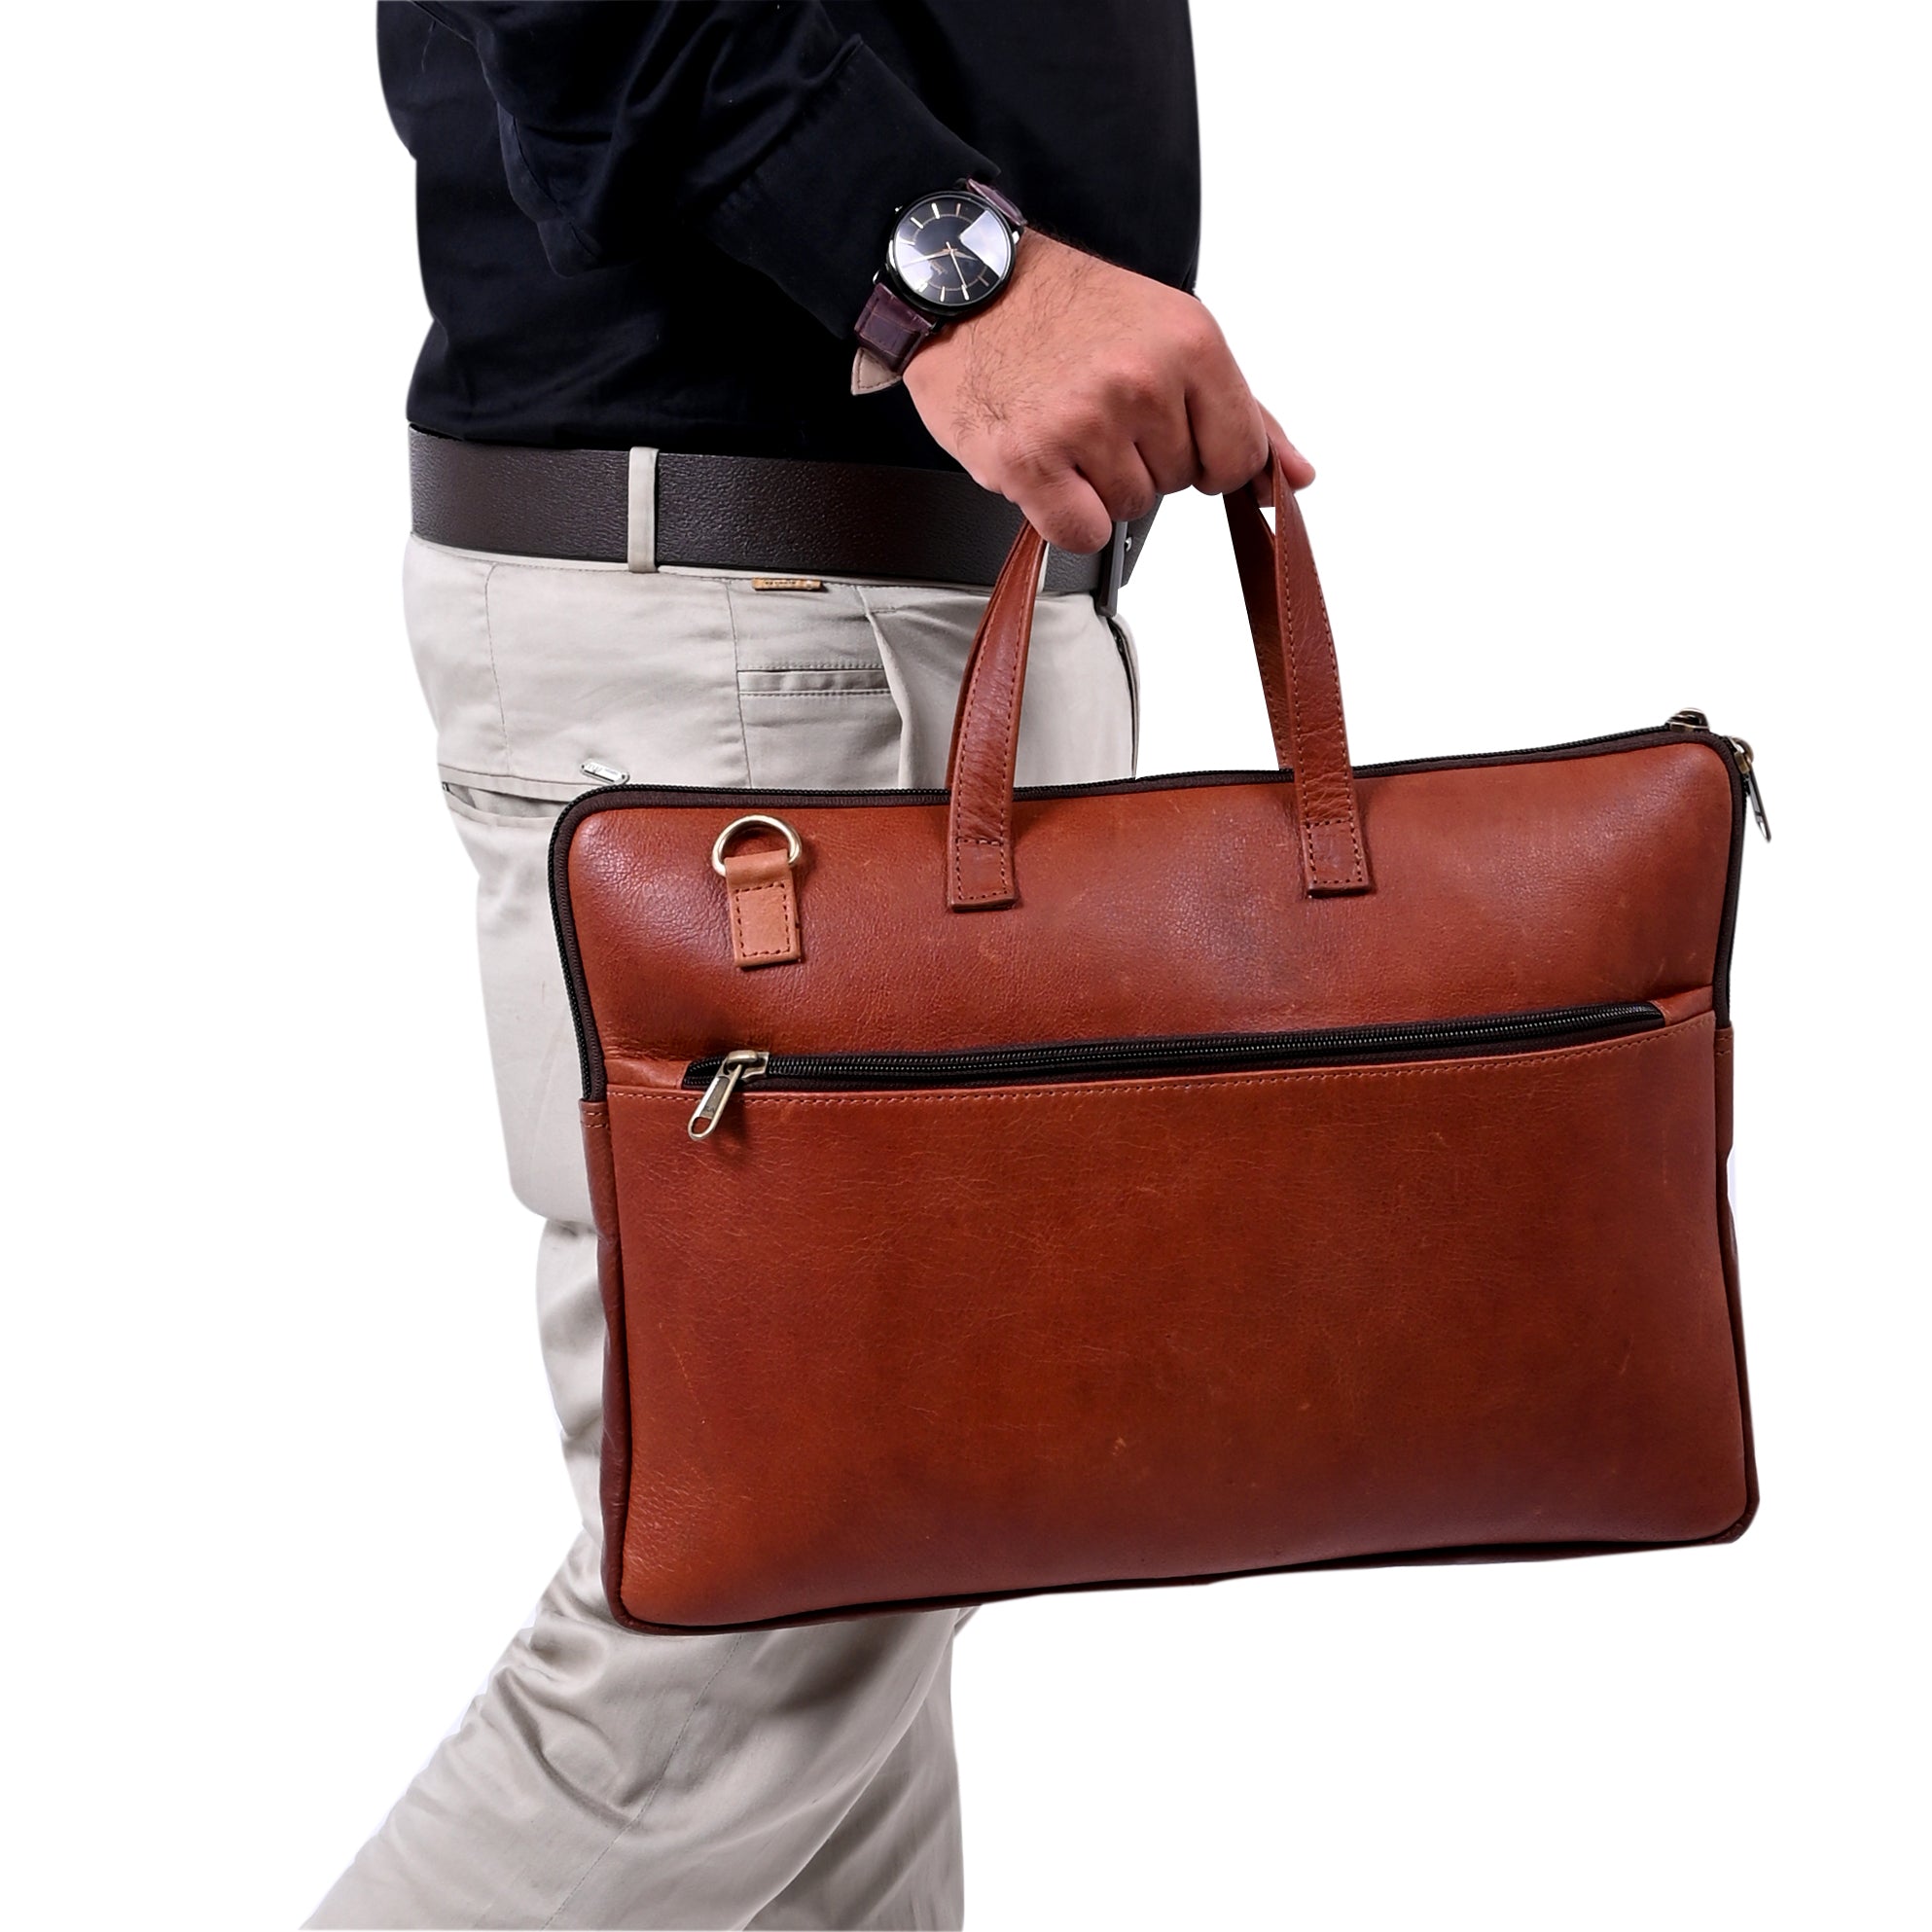 Online selling genuine leather products and accessories. – Leather Villa